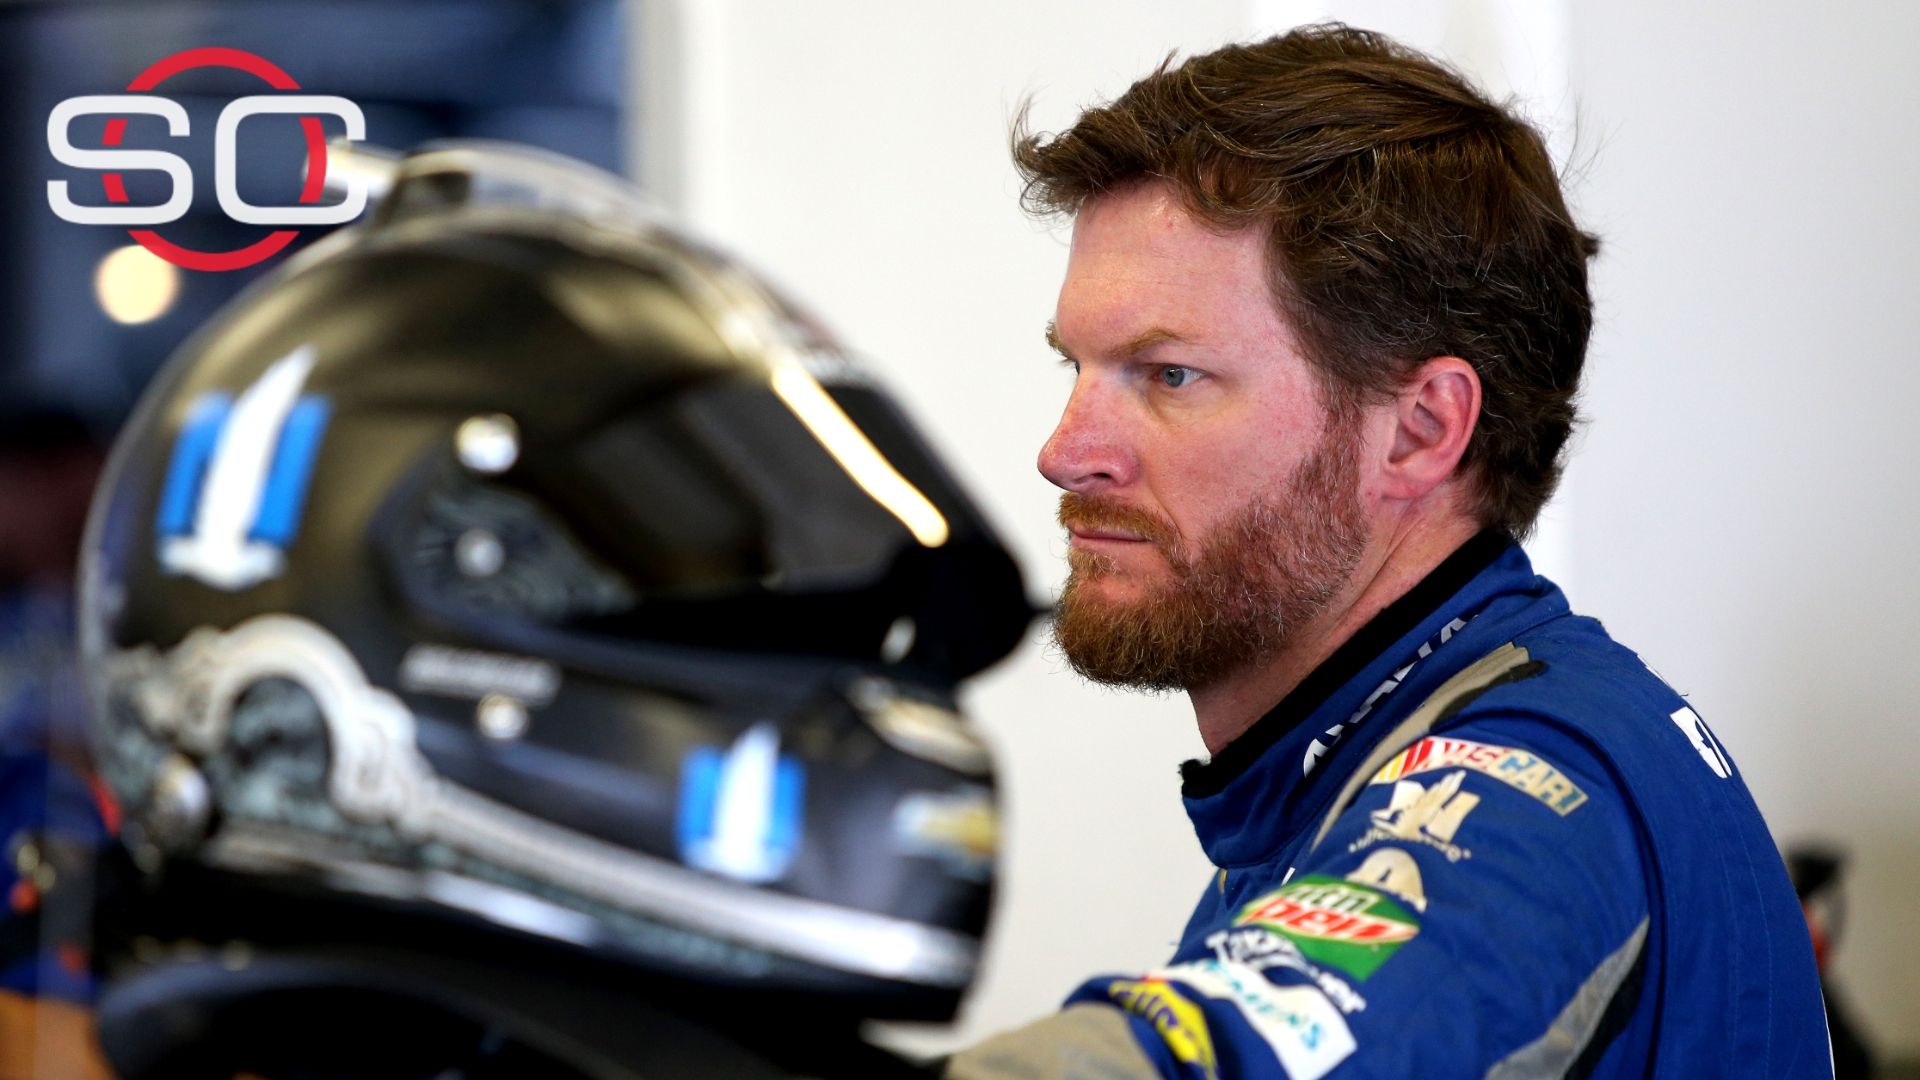 Gordon prepared to come out of retirement for Dale Jr.